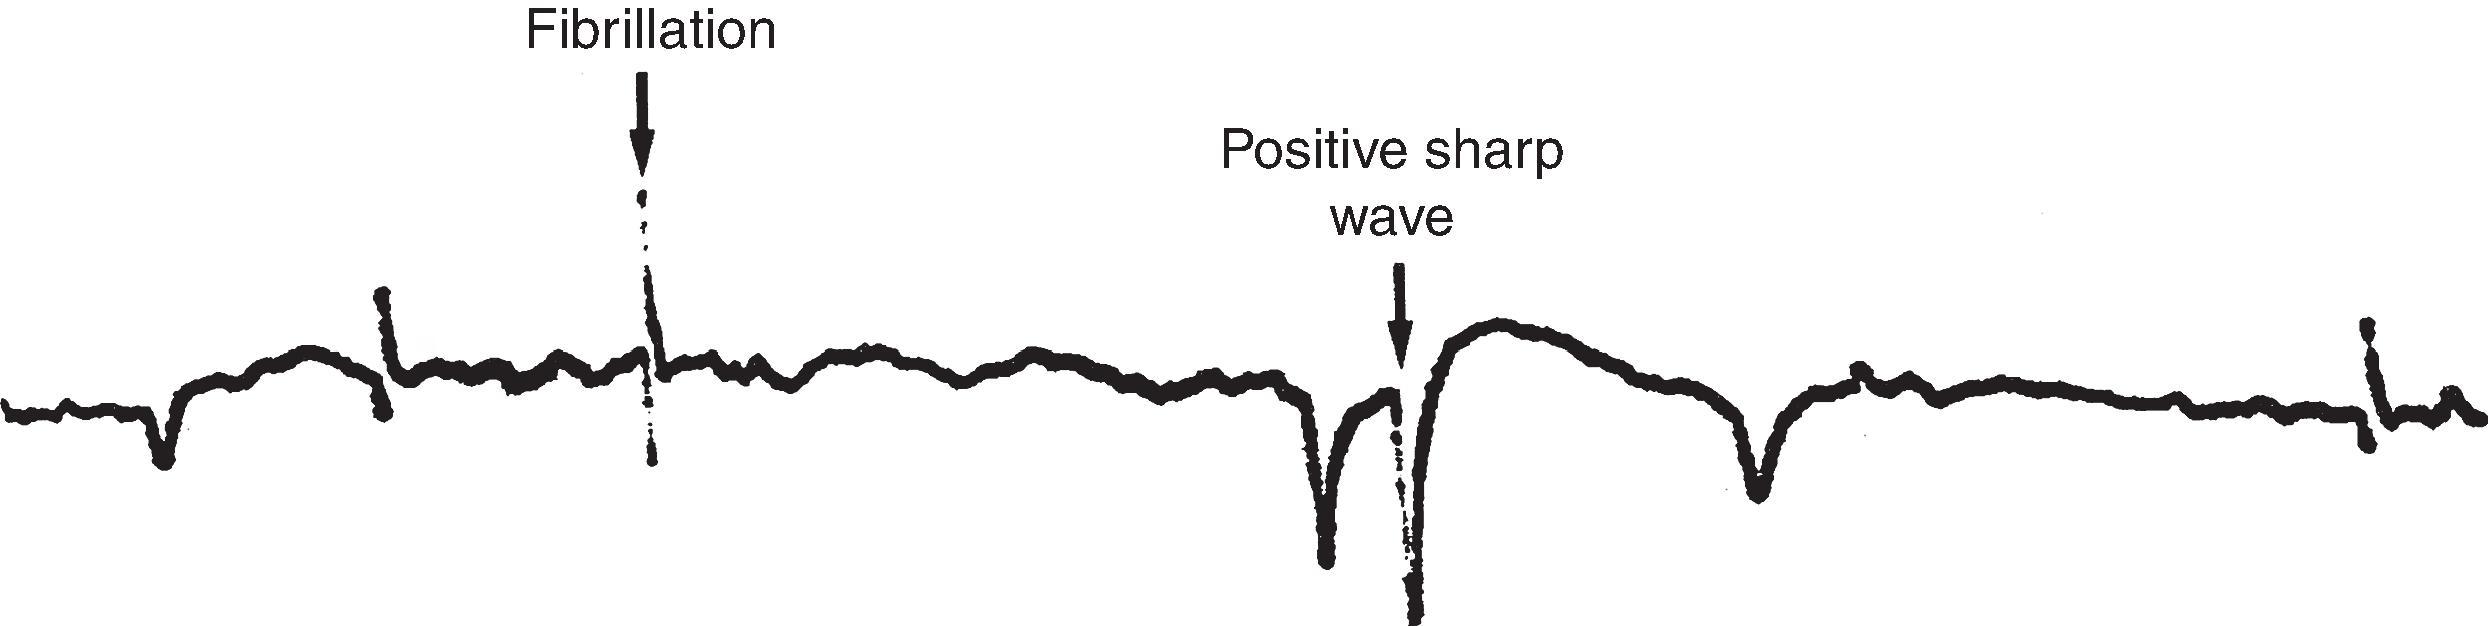 Figure 19.5, Positive sharp wave and fibrillation potentials recorded from a denervated muscle.